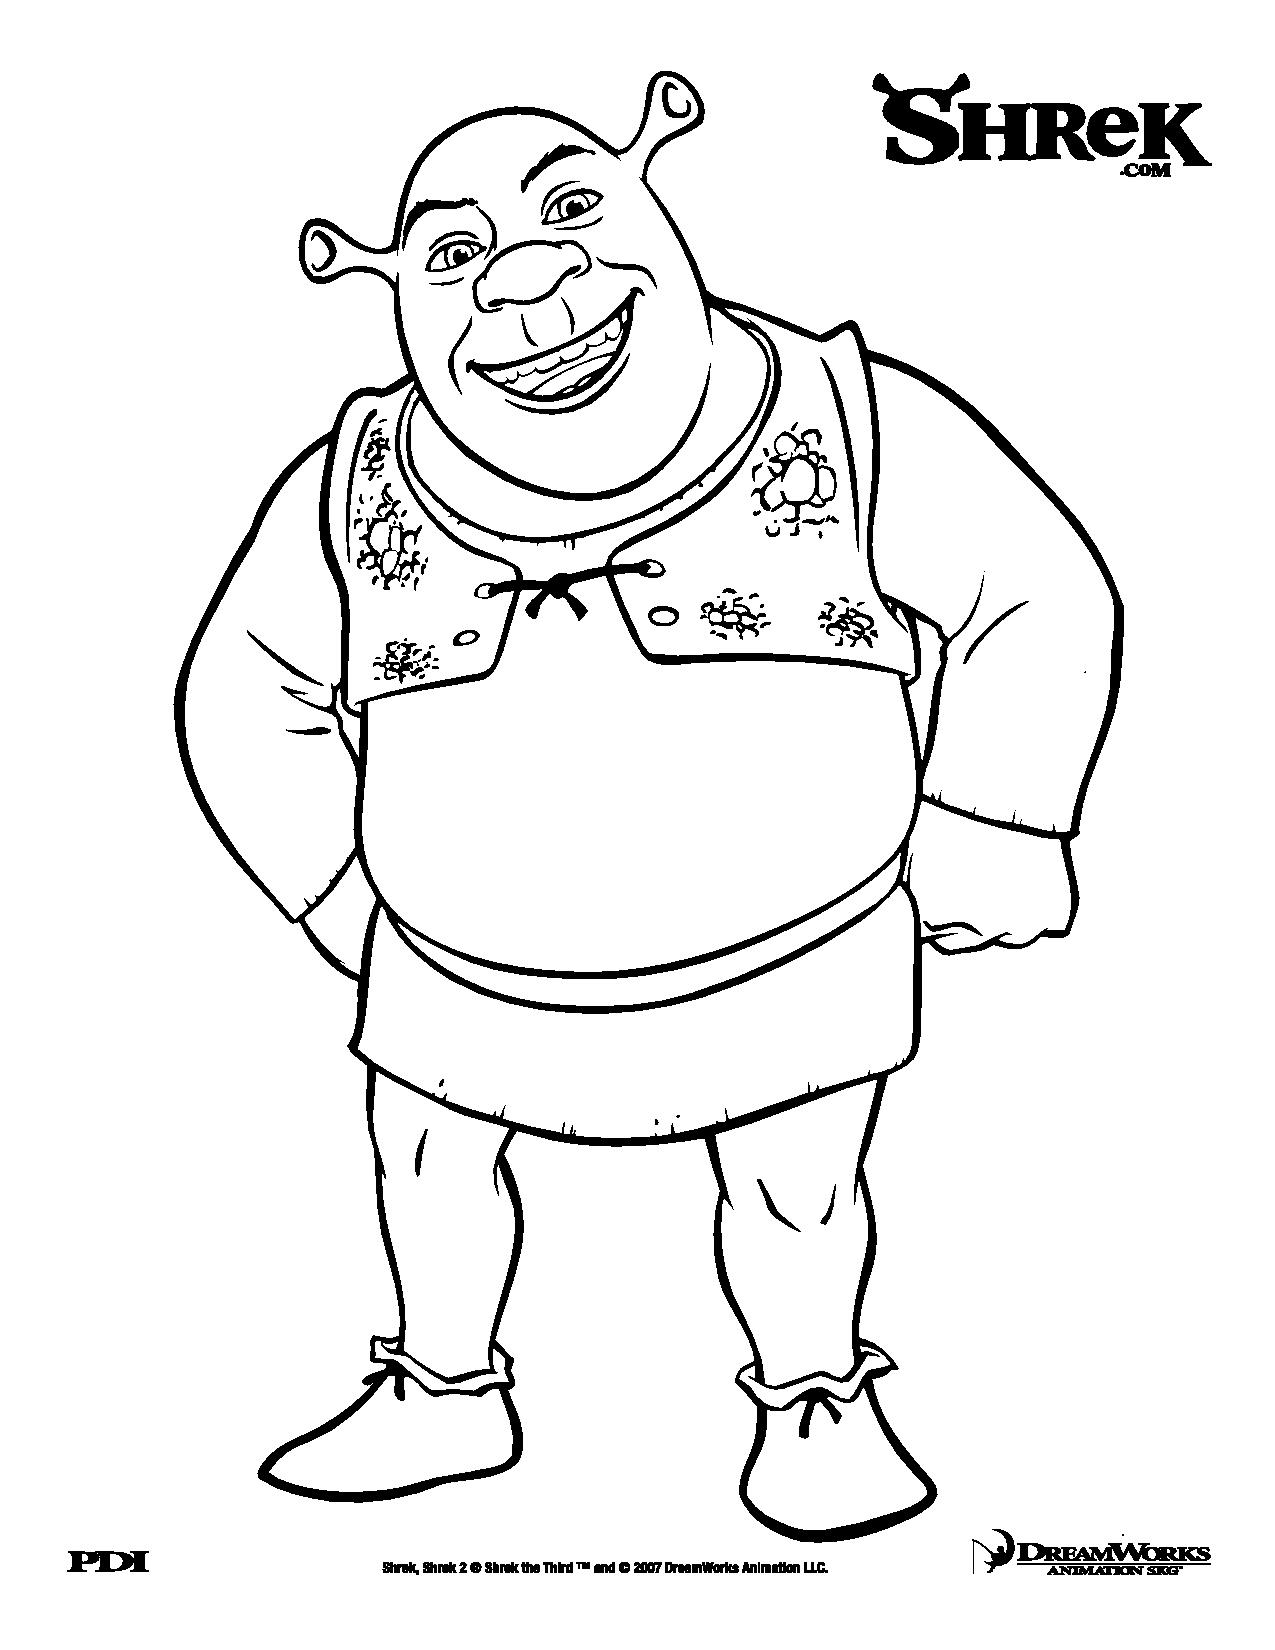 Shrek Coloring Pages Printable - Printable Word Searches